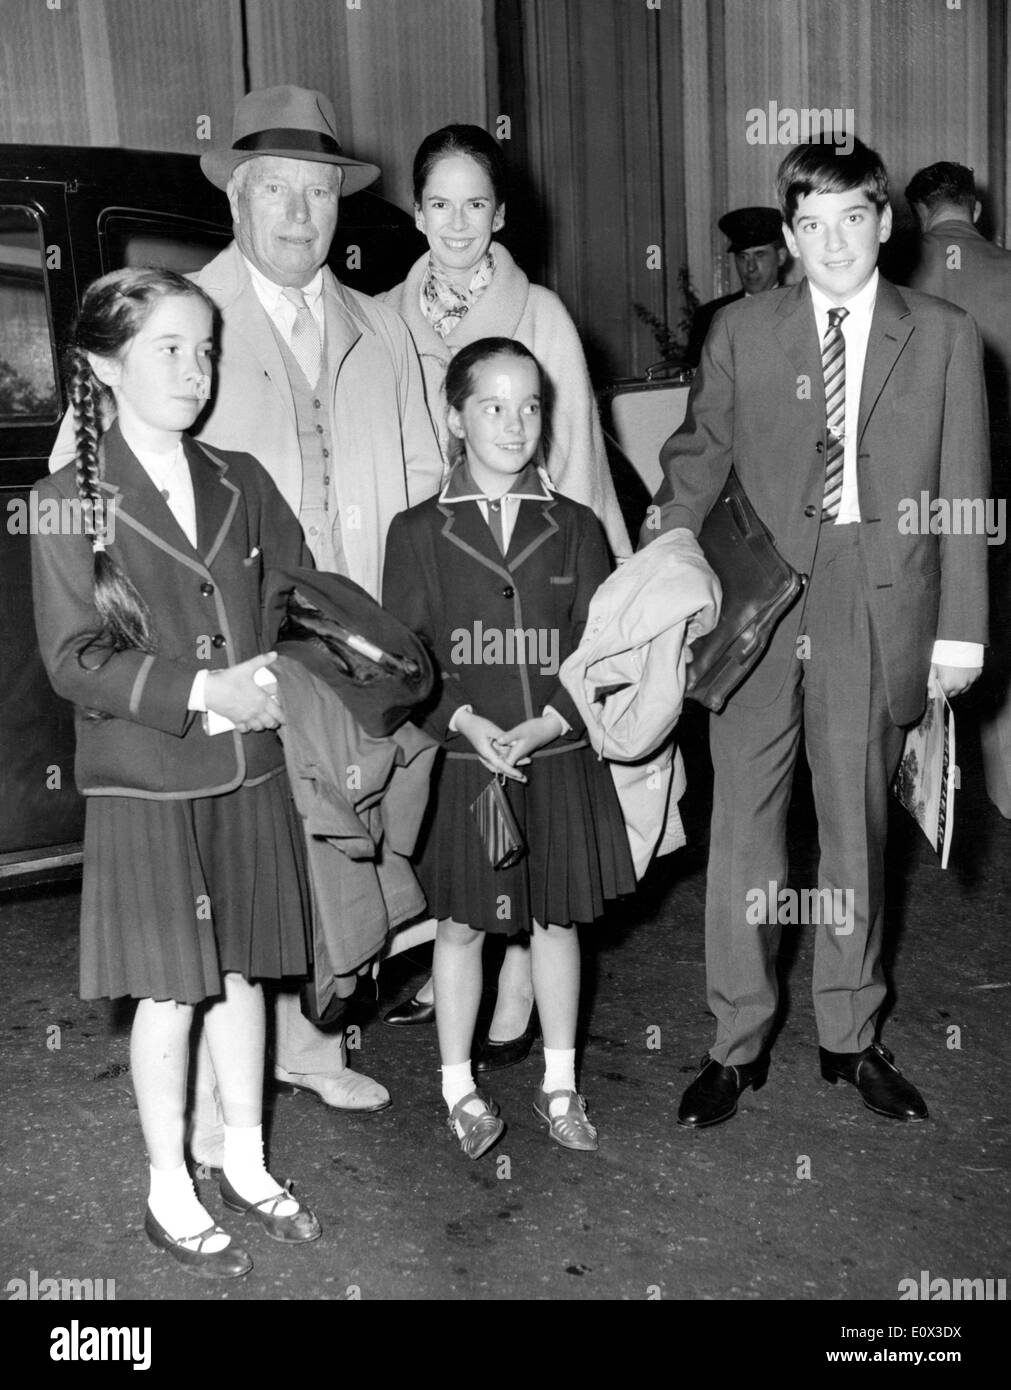 Actor Charlie Chaplin with his family Stock Photo - Alamy